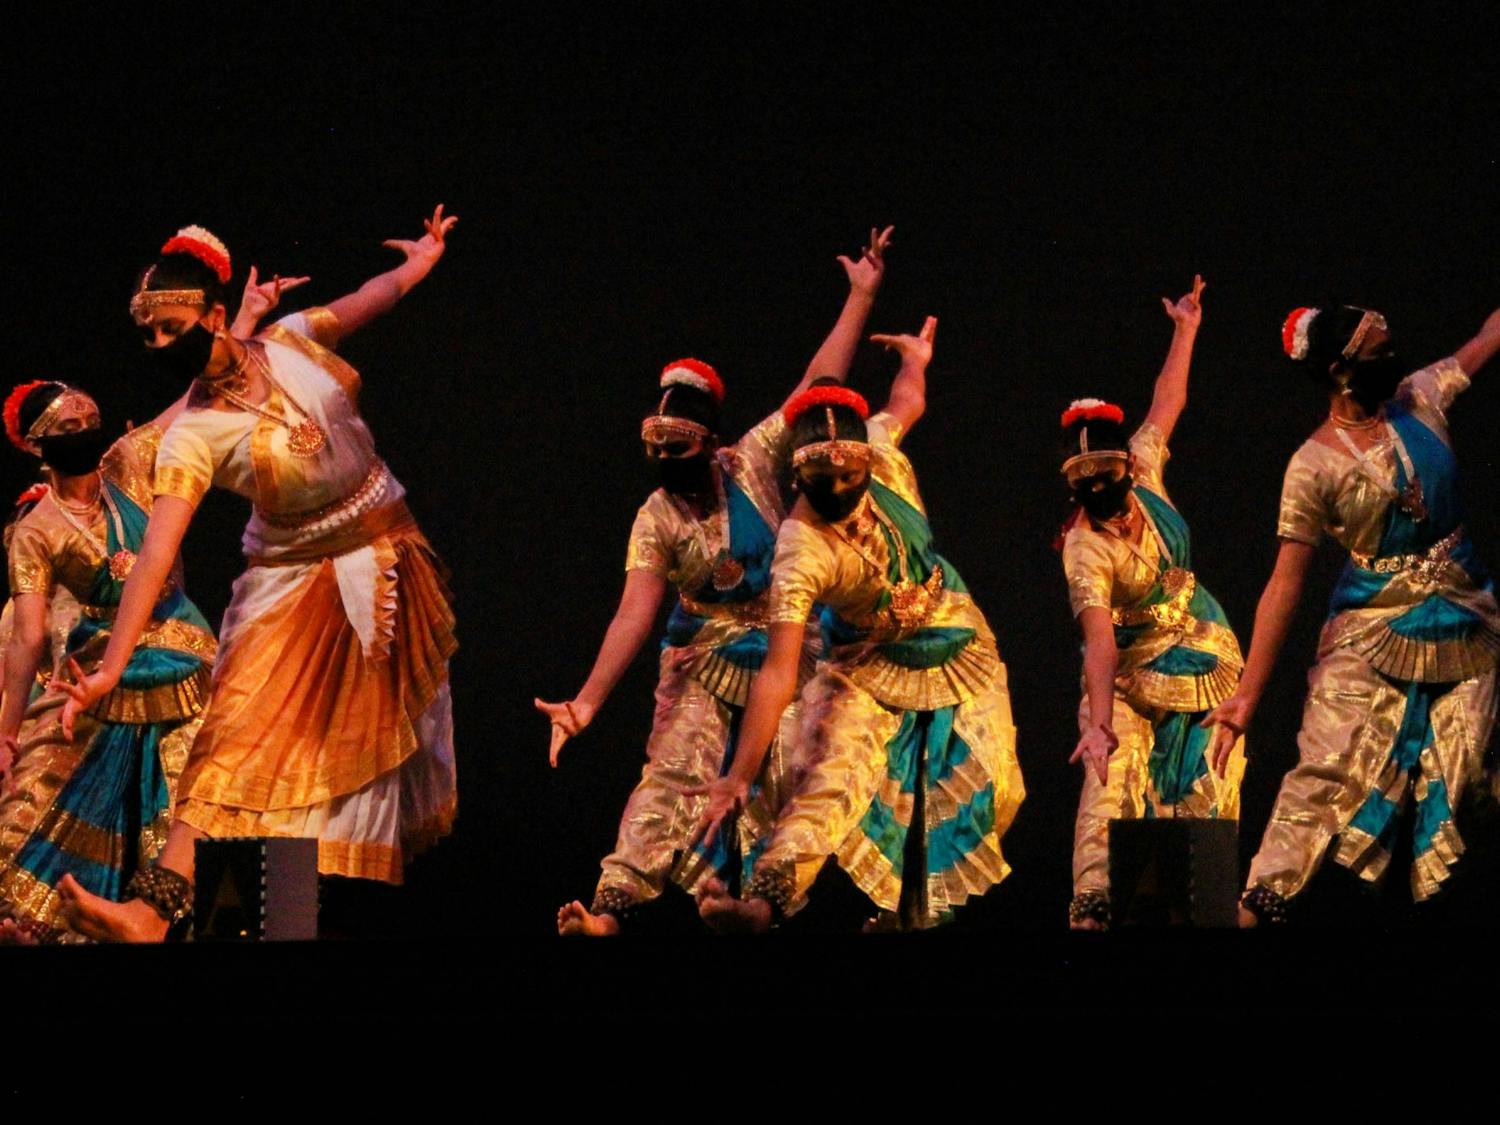 UNC Ek Taal performed at UNC AASA's "Journey in Asia" event on Feb. 27, 2022 at Memorial Hall.